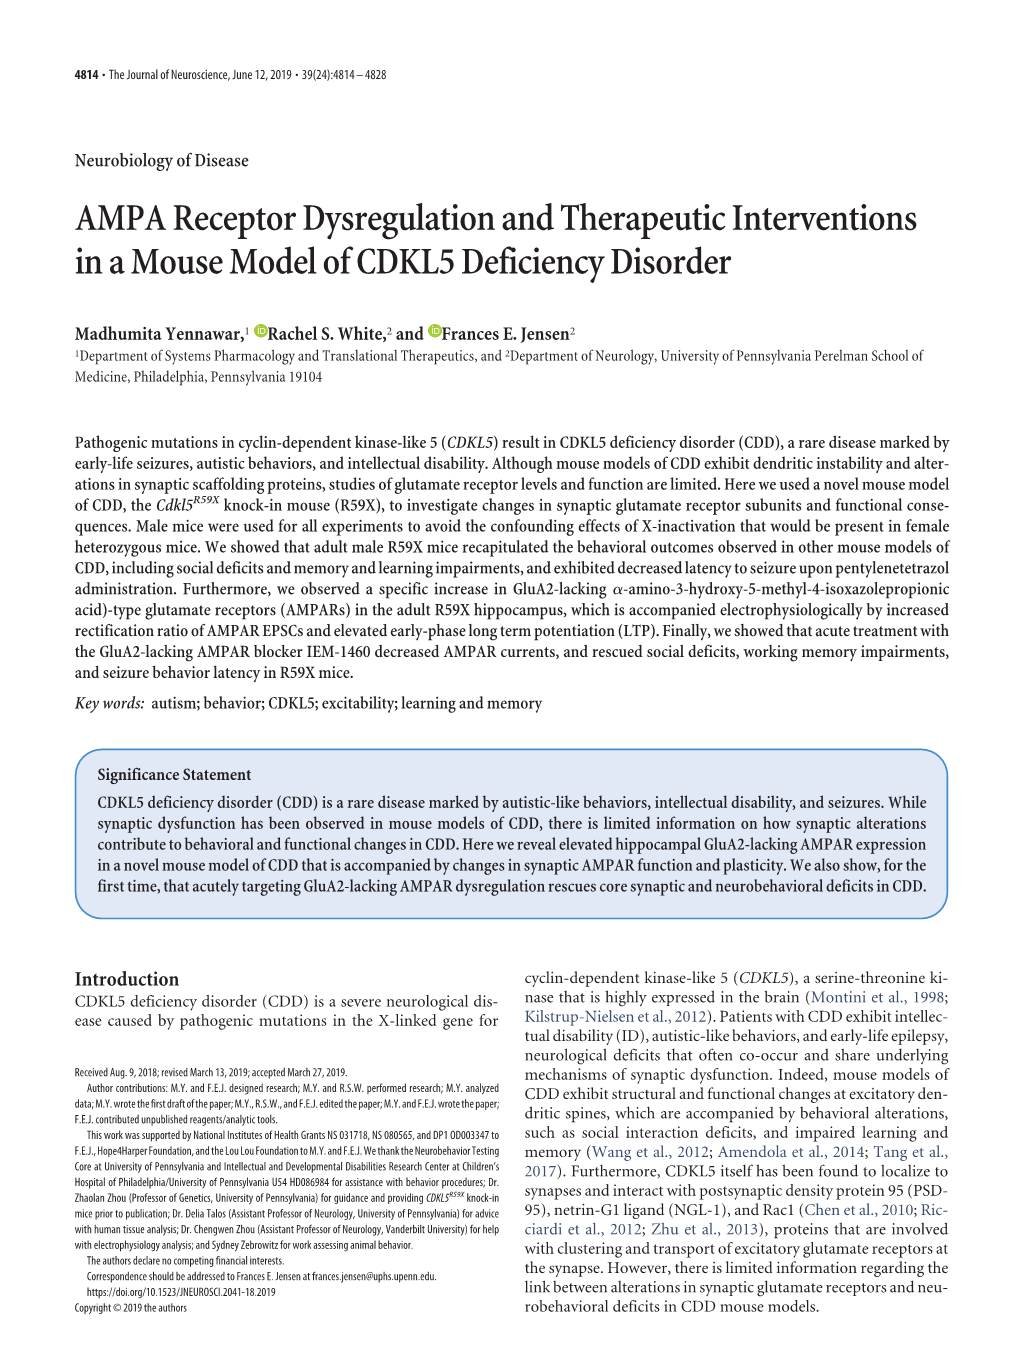 AMPA Receptor Dysregulation and Therapeutic Interventions in a Mouse Model of CDKL5 Deficiency Disorder